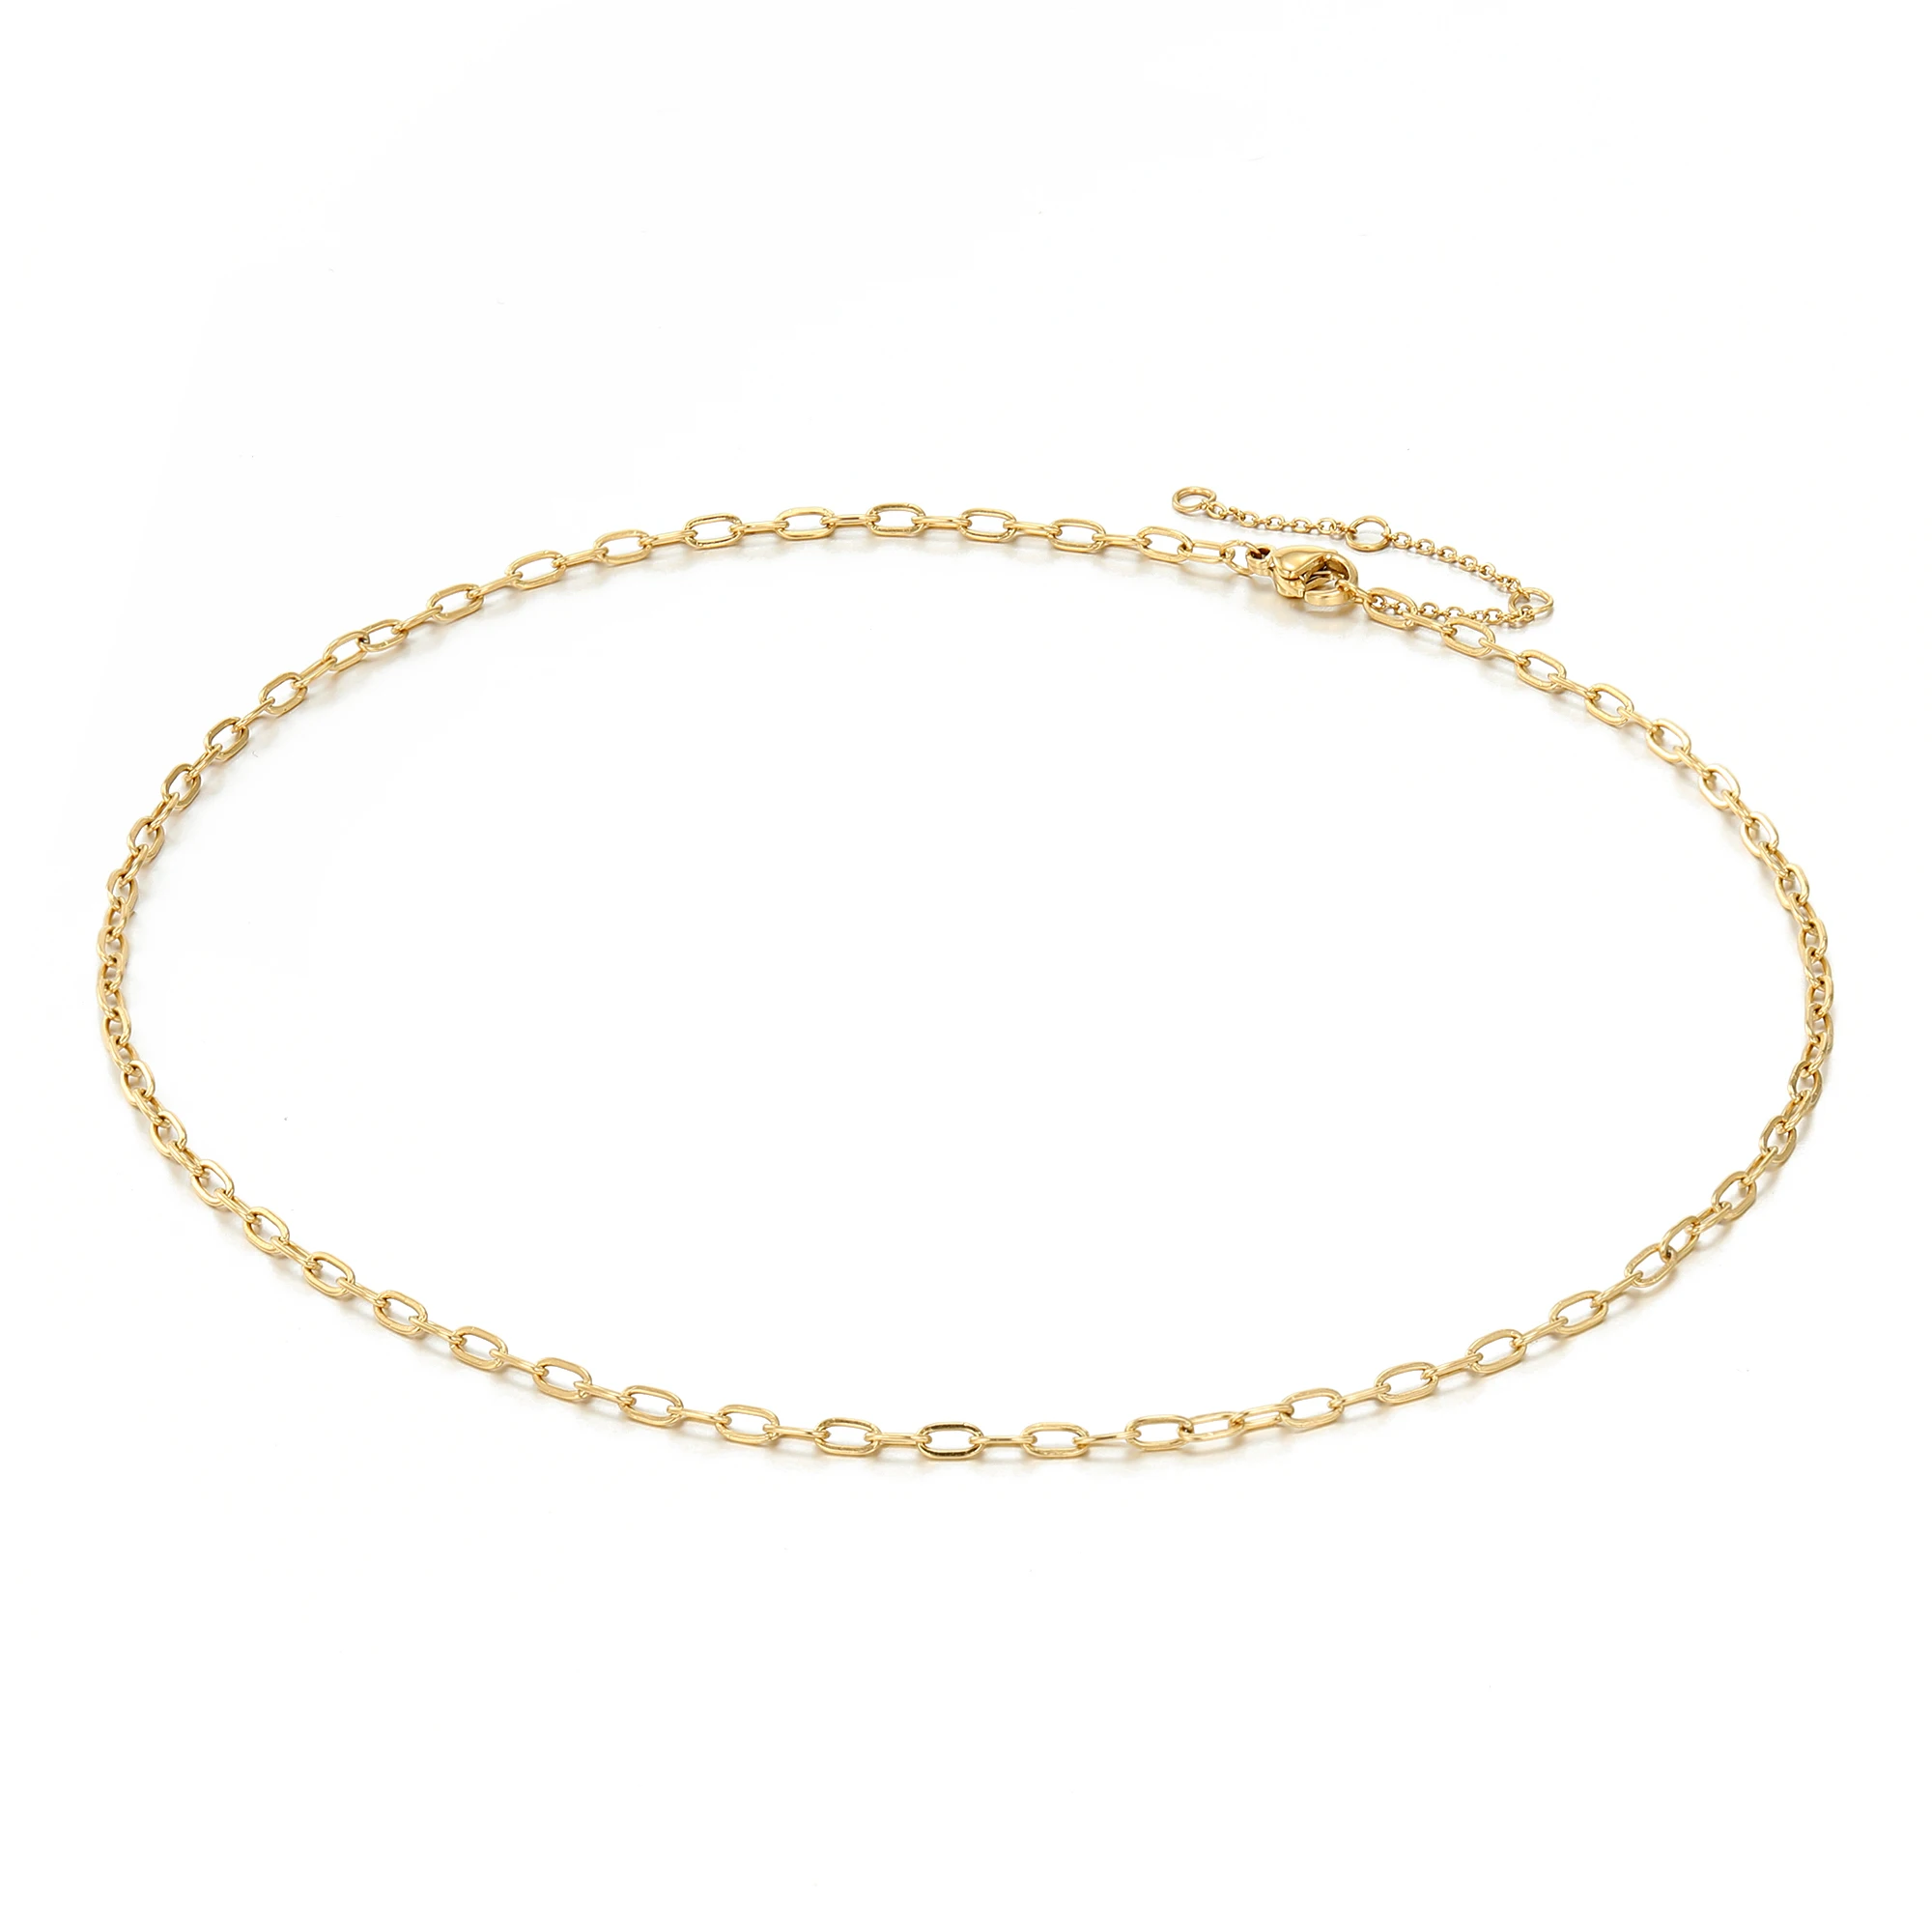 

eManco Fashion short collarbone chain necklace for women 316L titanium steel 14K gold plated necklace